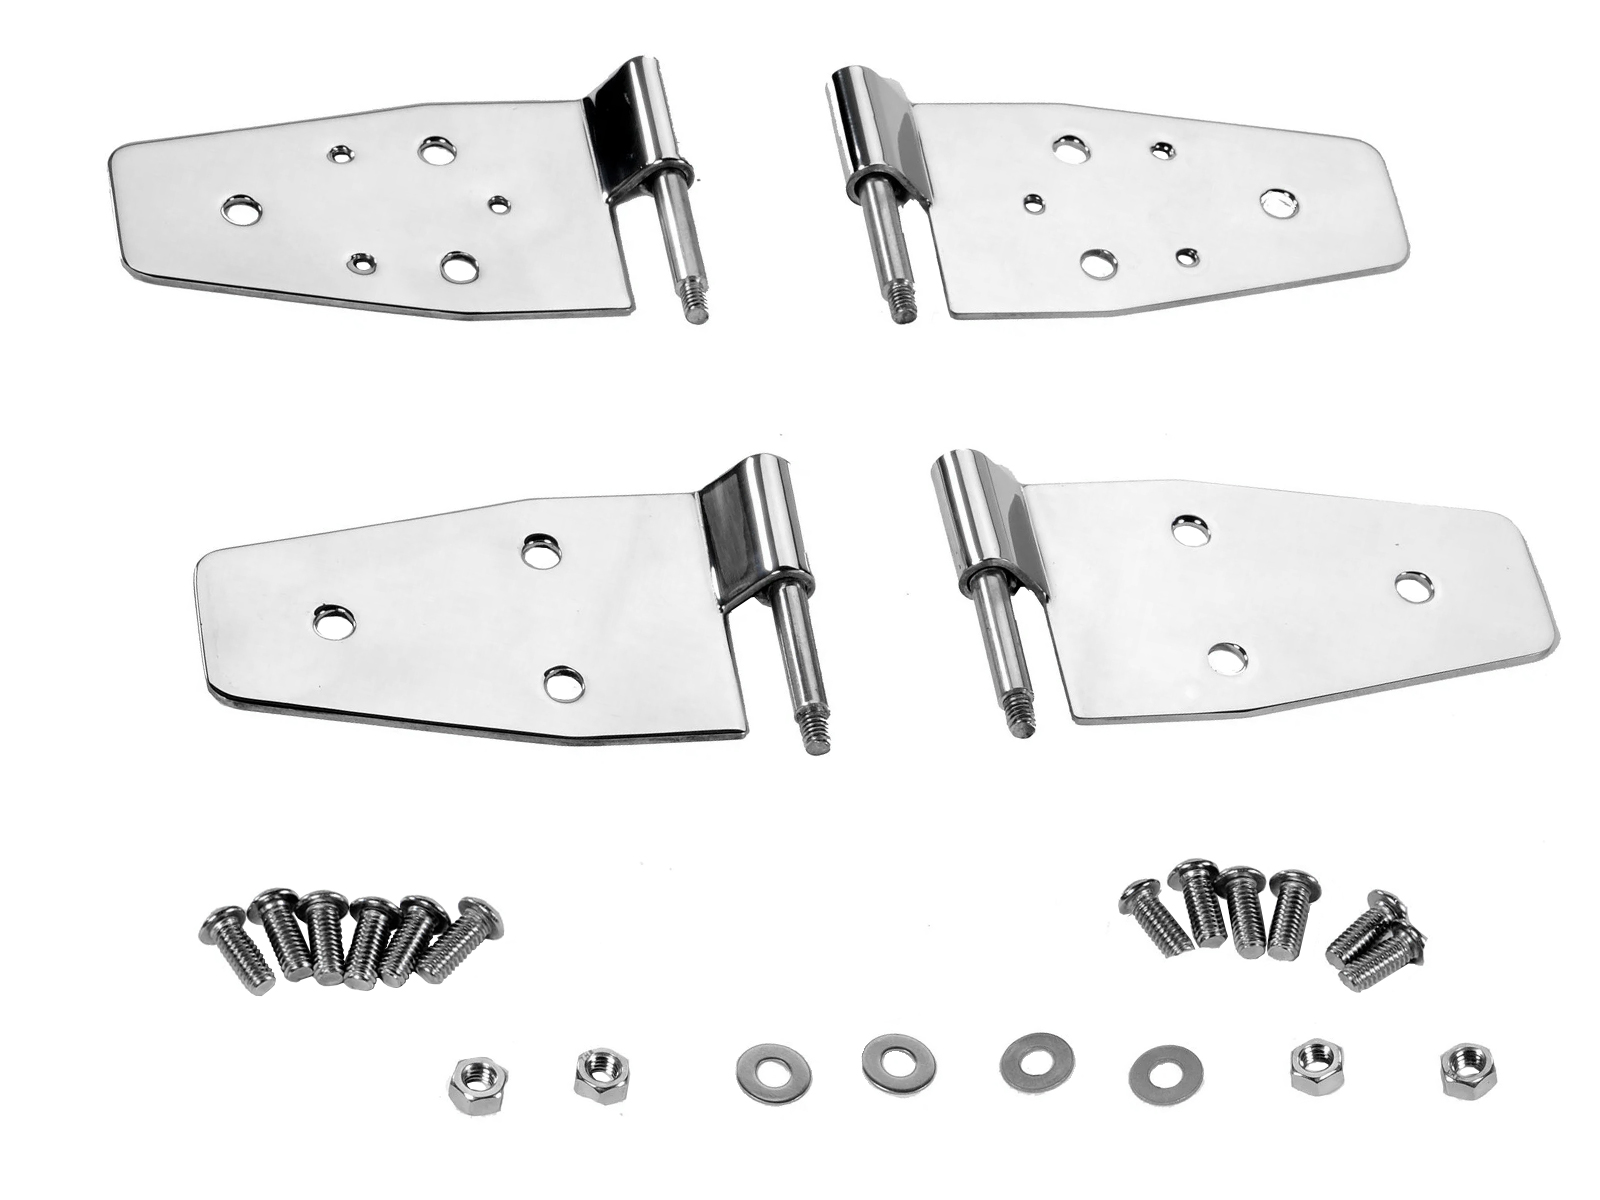 Rampage Replacement Door Handle for Jeep - Polished Stainless Steel - Qty 1  Rampage Vehicle Trim RA87500